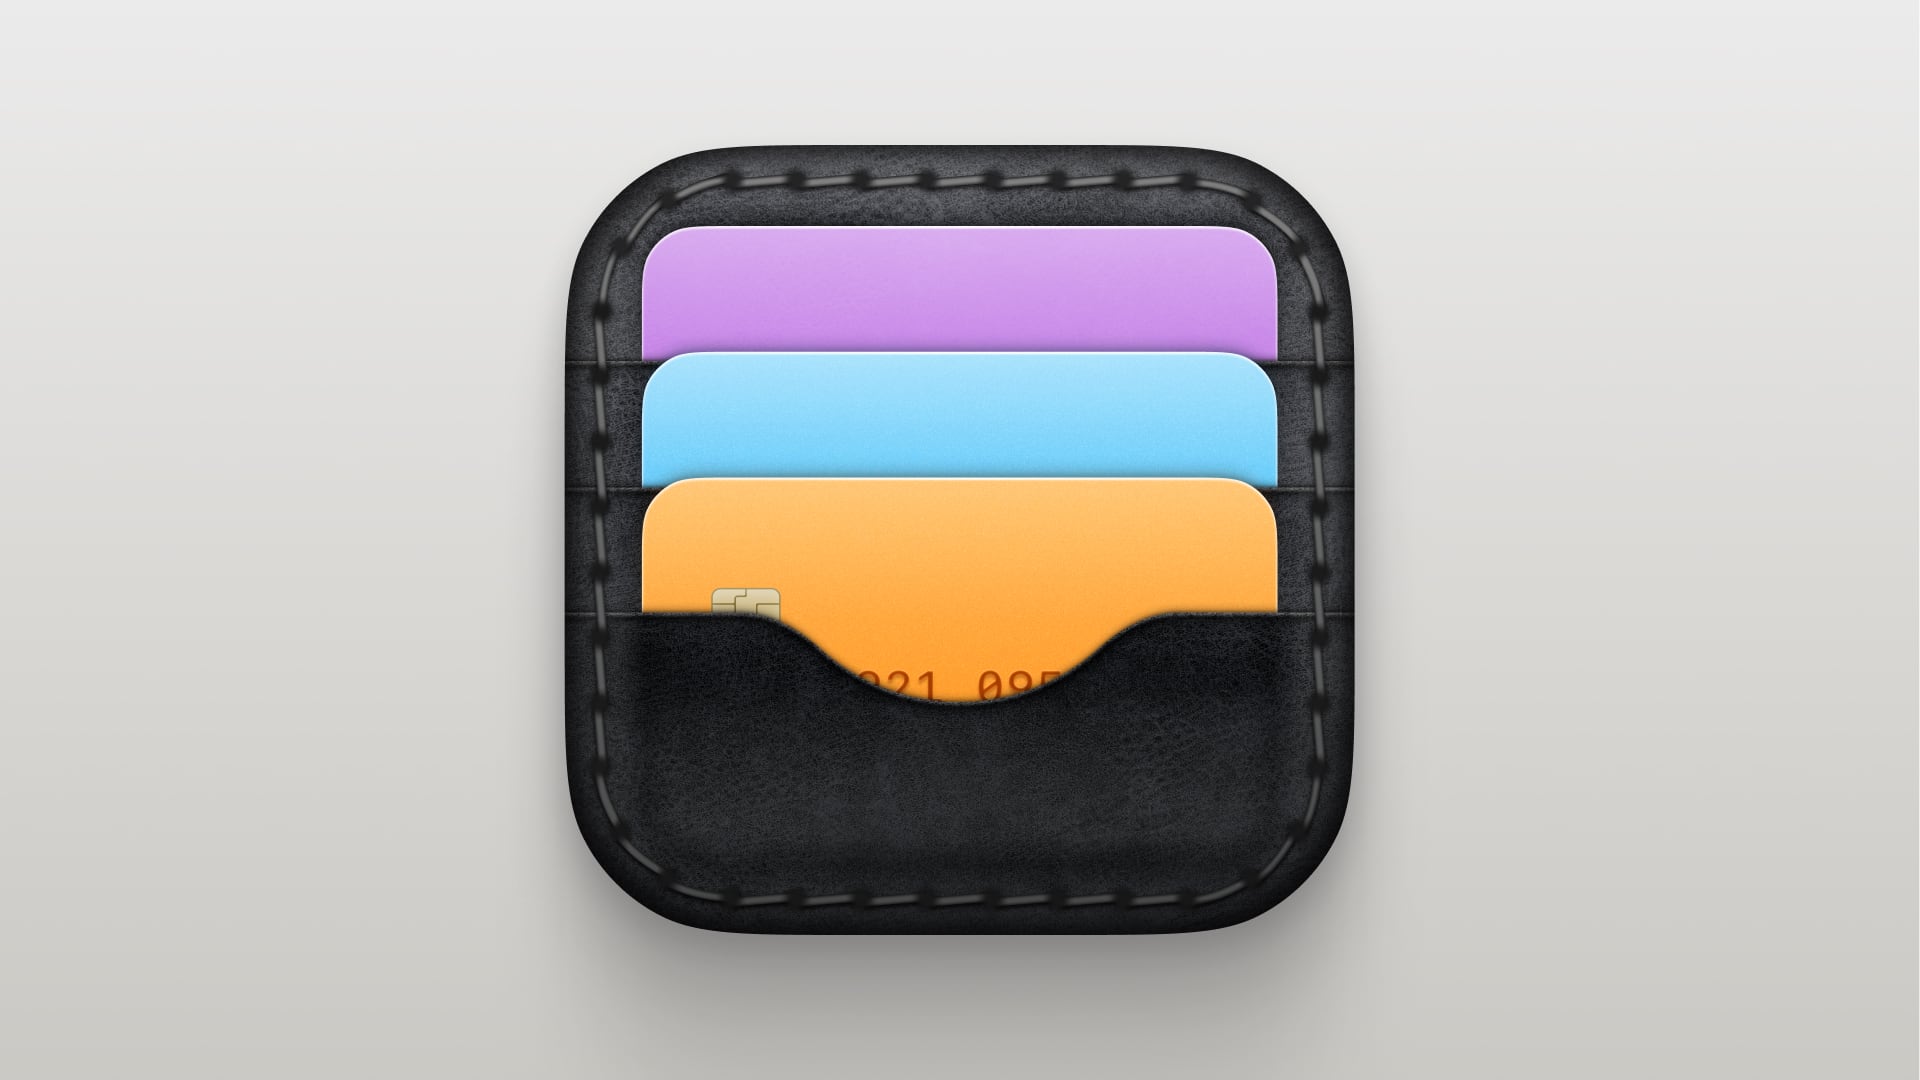 An iOS app icon of a wallet, textured and richly detailed. The wallet is black leather with stitching around the edges and holds three cards: purple, blue, and orange. A microchip and some of the numbers can be seen on the frontmost orange card, peeking out from behind the wallet's pocket flap.